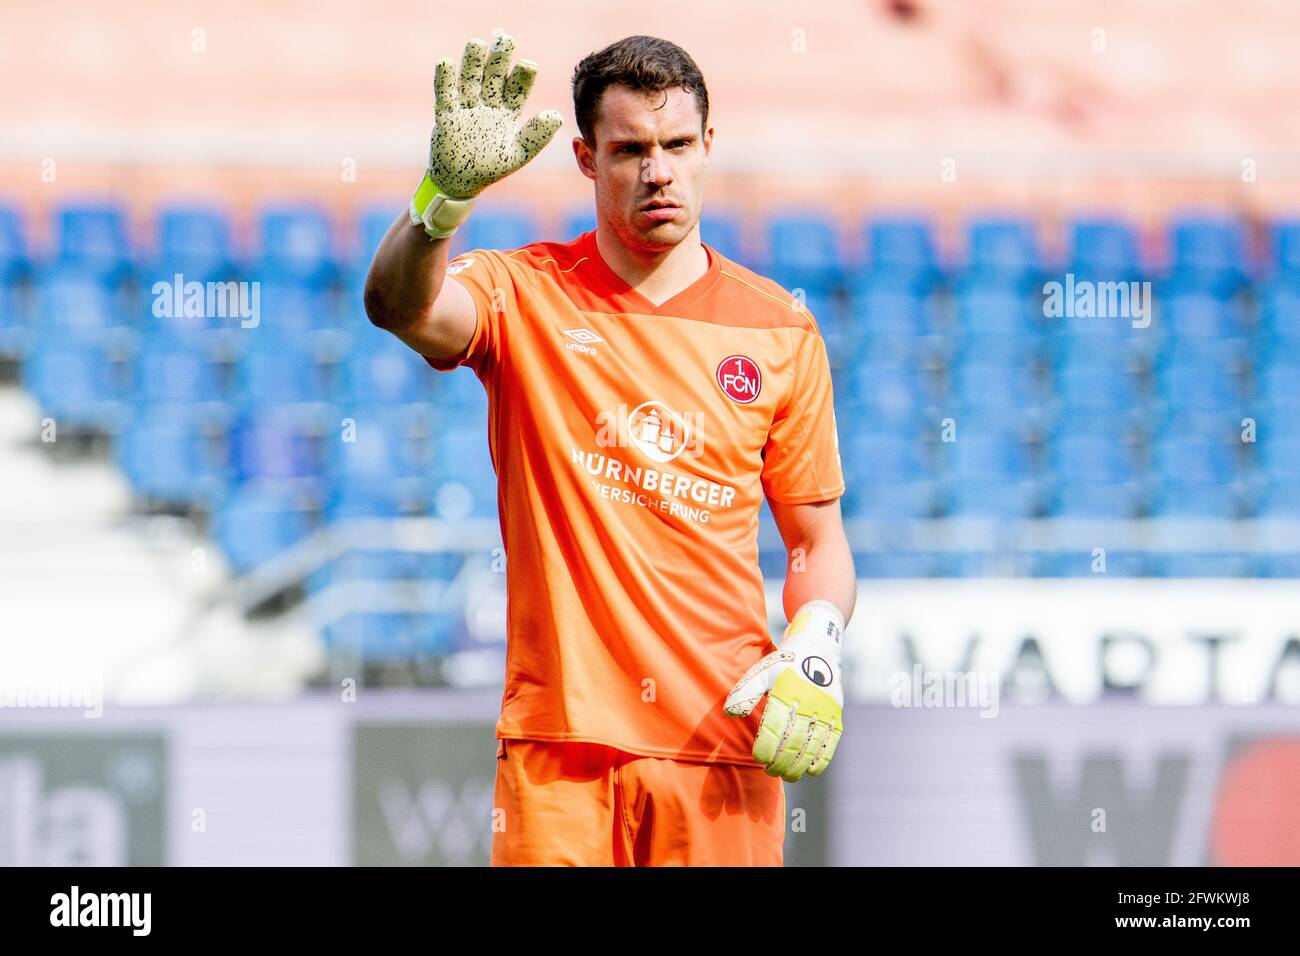 Hanover, Germany. 23rd May, 2021. Football: 2. Bundesliga, Hannover 96 - 1. FC Nürnberg, 34. matchday at HDI Arena. Nuremberg goalkeeper Christian Mathenia raises his hand on the pitch. Credit: Hauke-Christian Dittrich/dpa - IMPORTANT NOTE: In accordance with the regulations of the DFL Deutsche Fußball Liga and/or the DFB Deutscher Fußball-Bund, it is prohibited to use or have used photographs taken in the stadium and/or of the match in the form of sequence pictures and/or video-like photo series./dpa/Alamy Live News Stock Photo